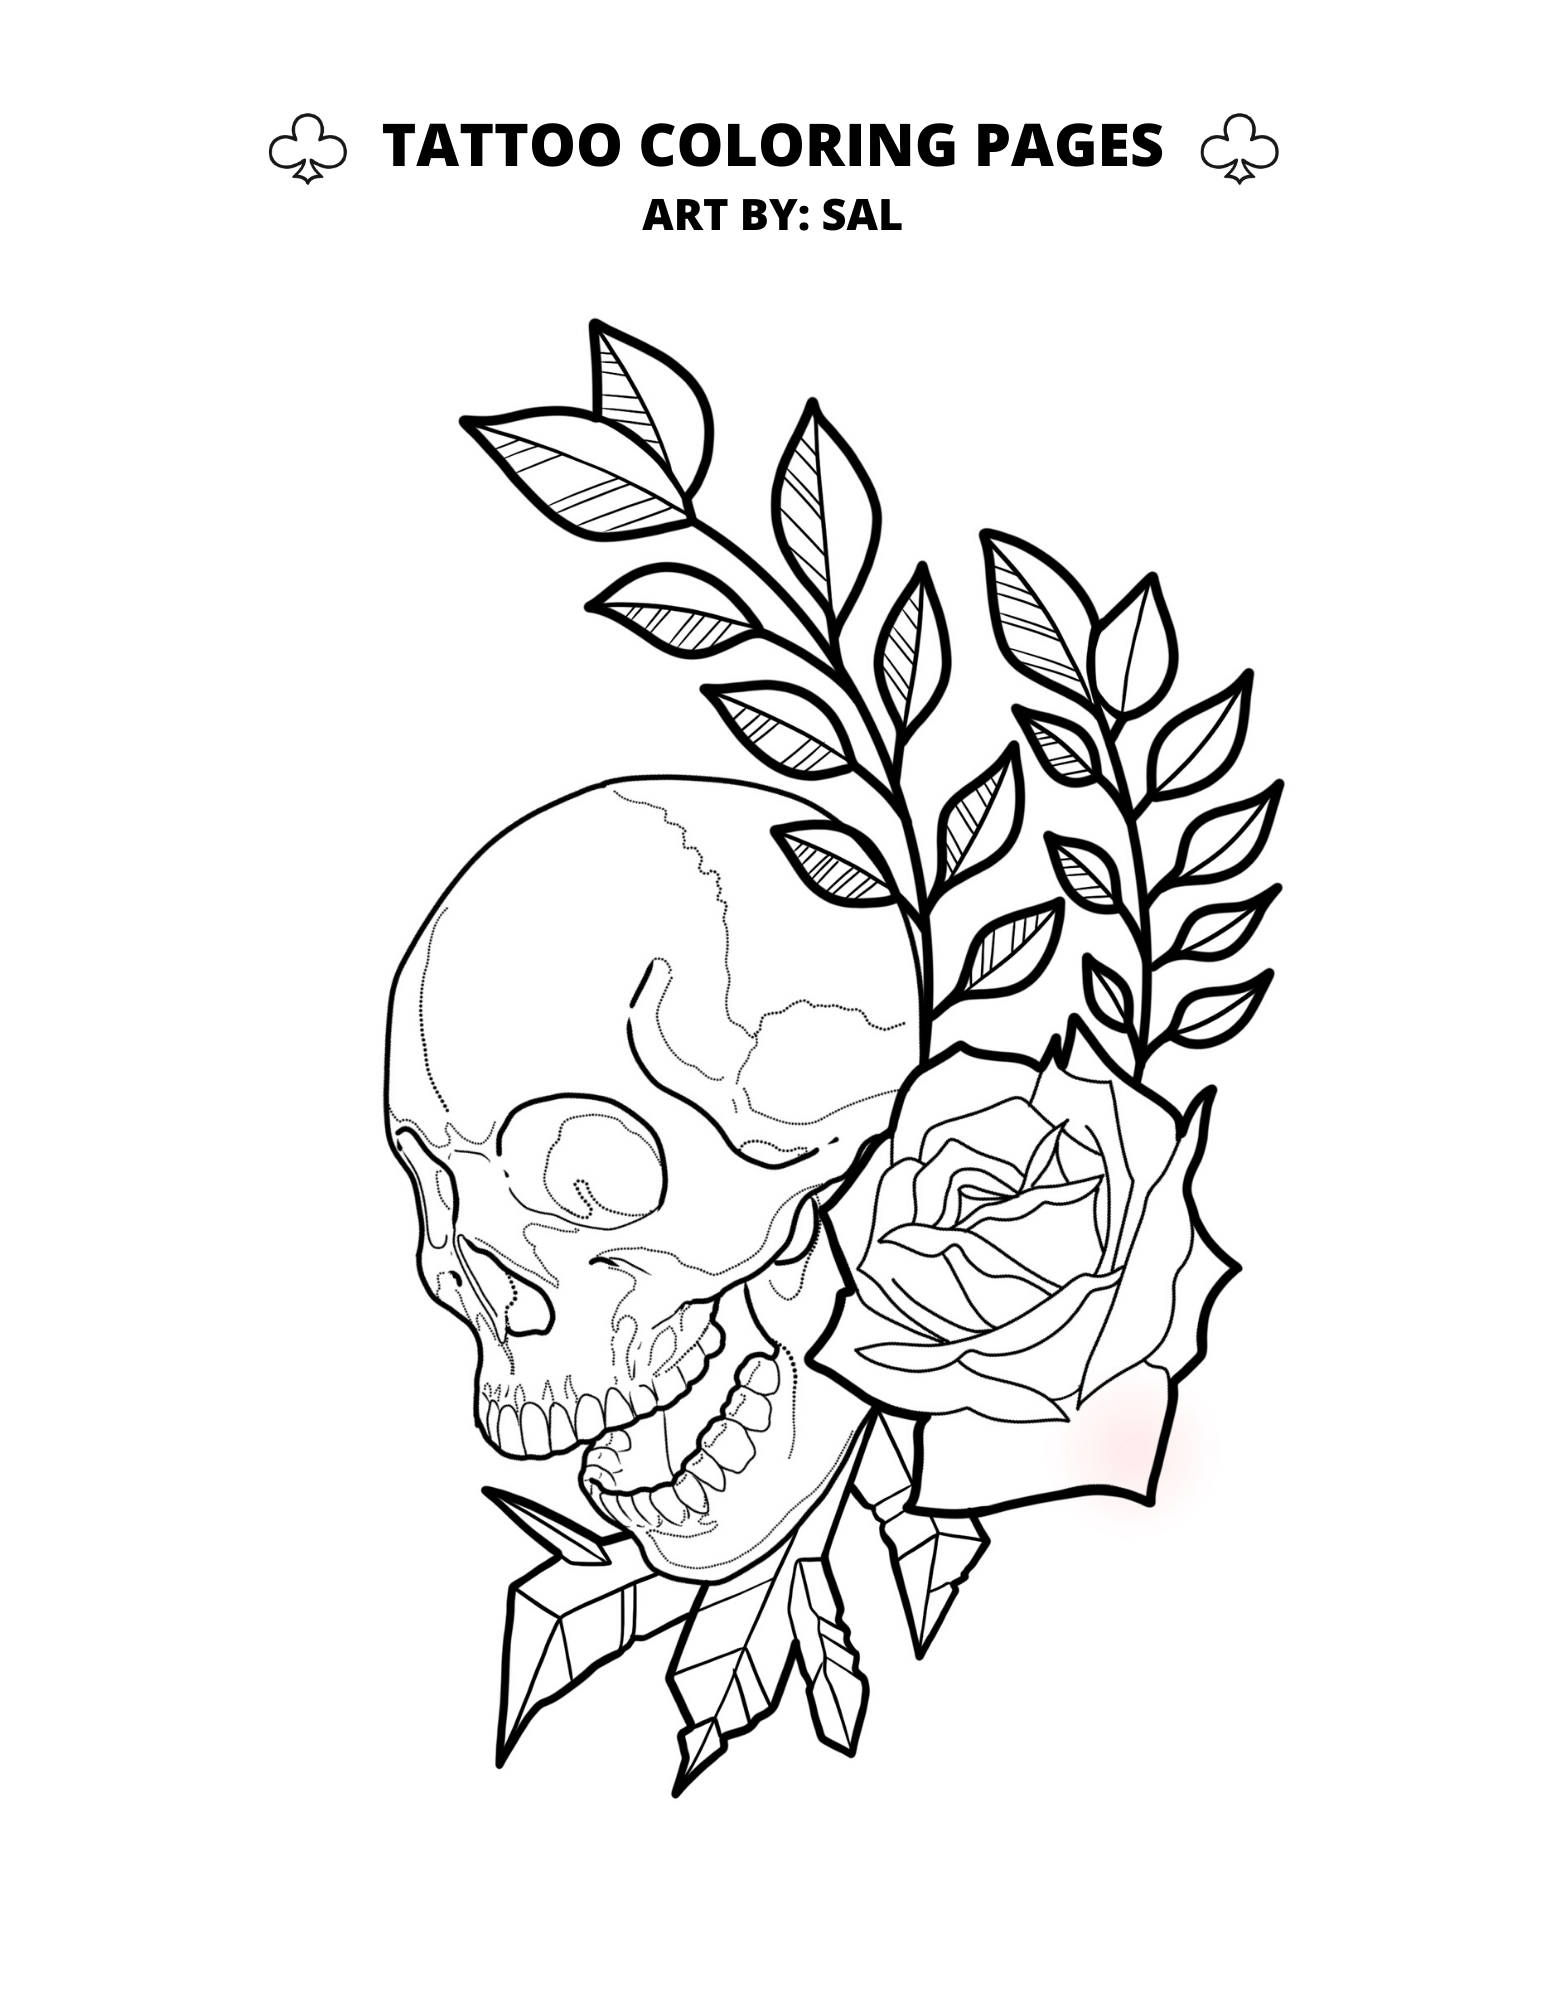 Tattoo Coloring Pages Club Tattoo